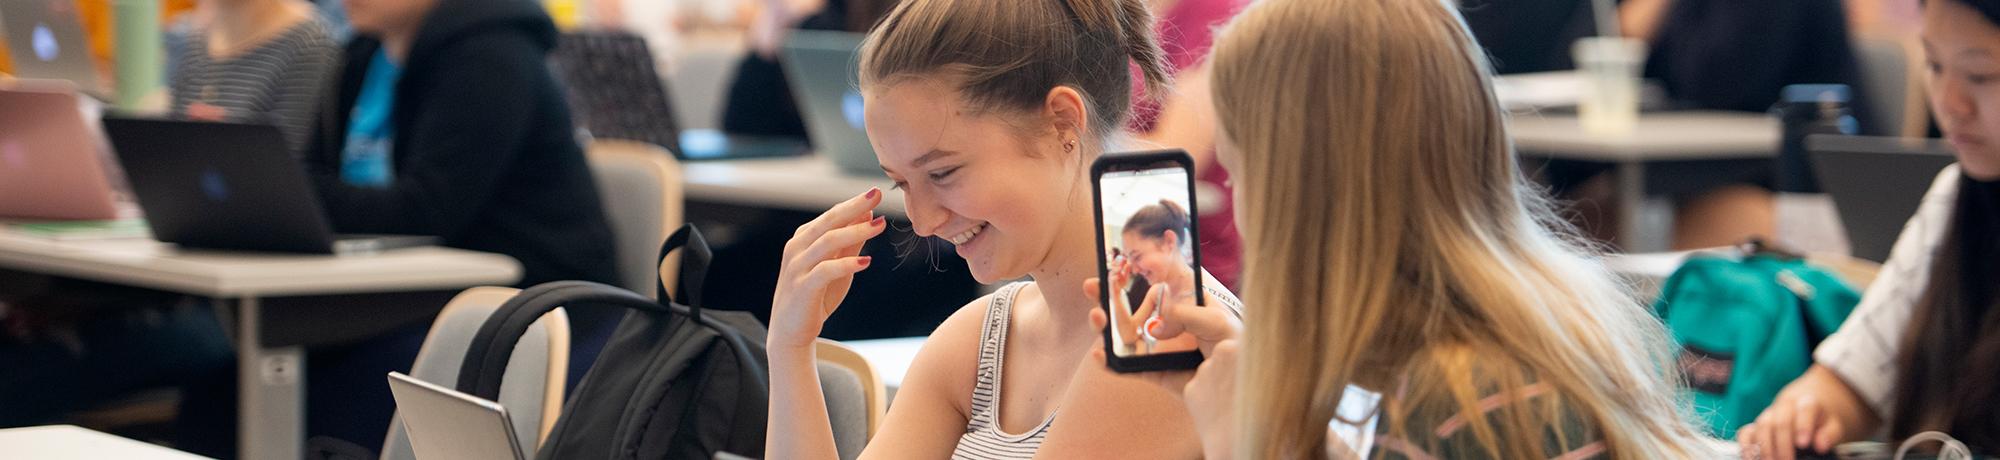 Ellery Quinn, a food science major, bows her head with a smile as her diet work is used as a good example and her friend using a cell phone to record her shyness during Nutrition 10 in California Hall on May 7, 2019. 